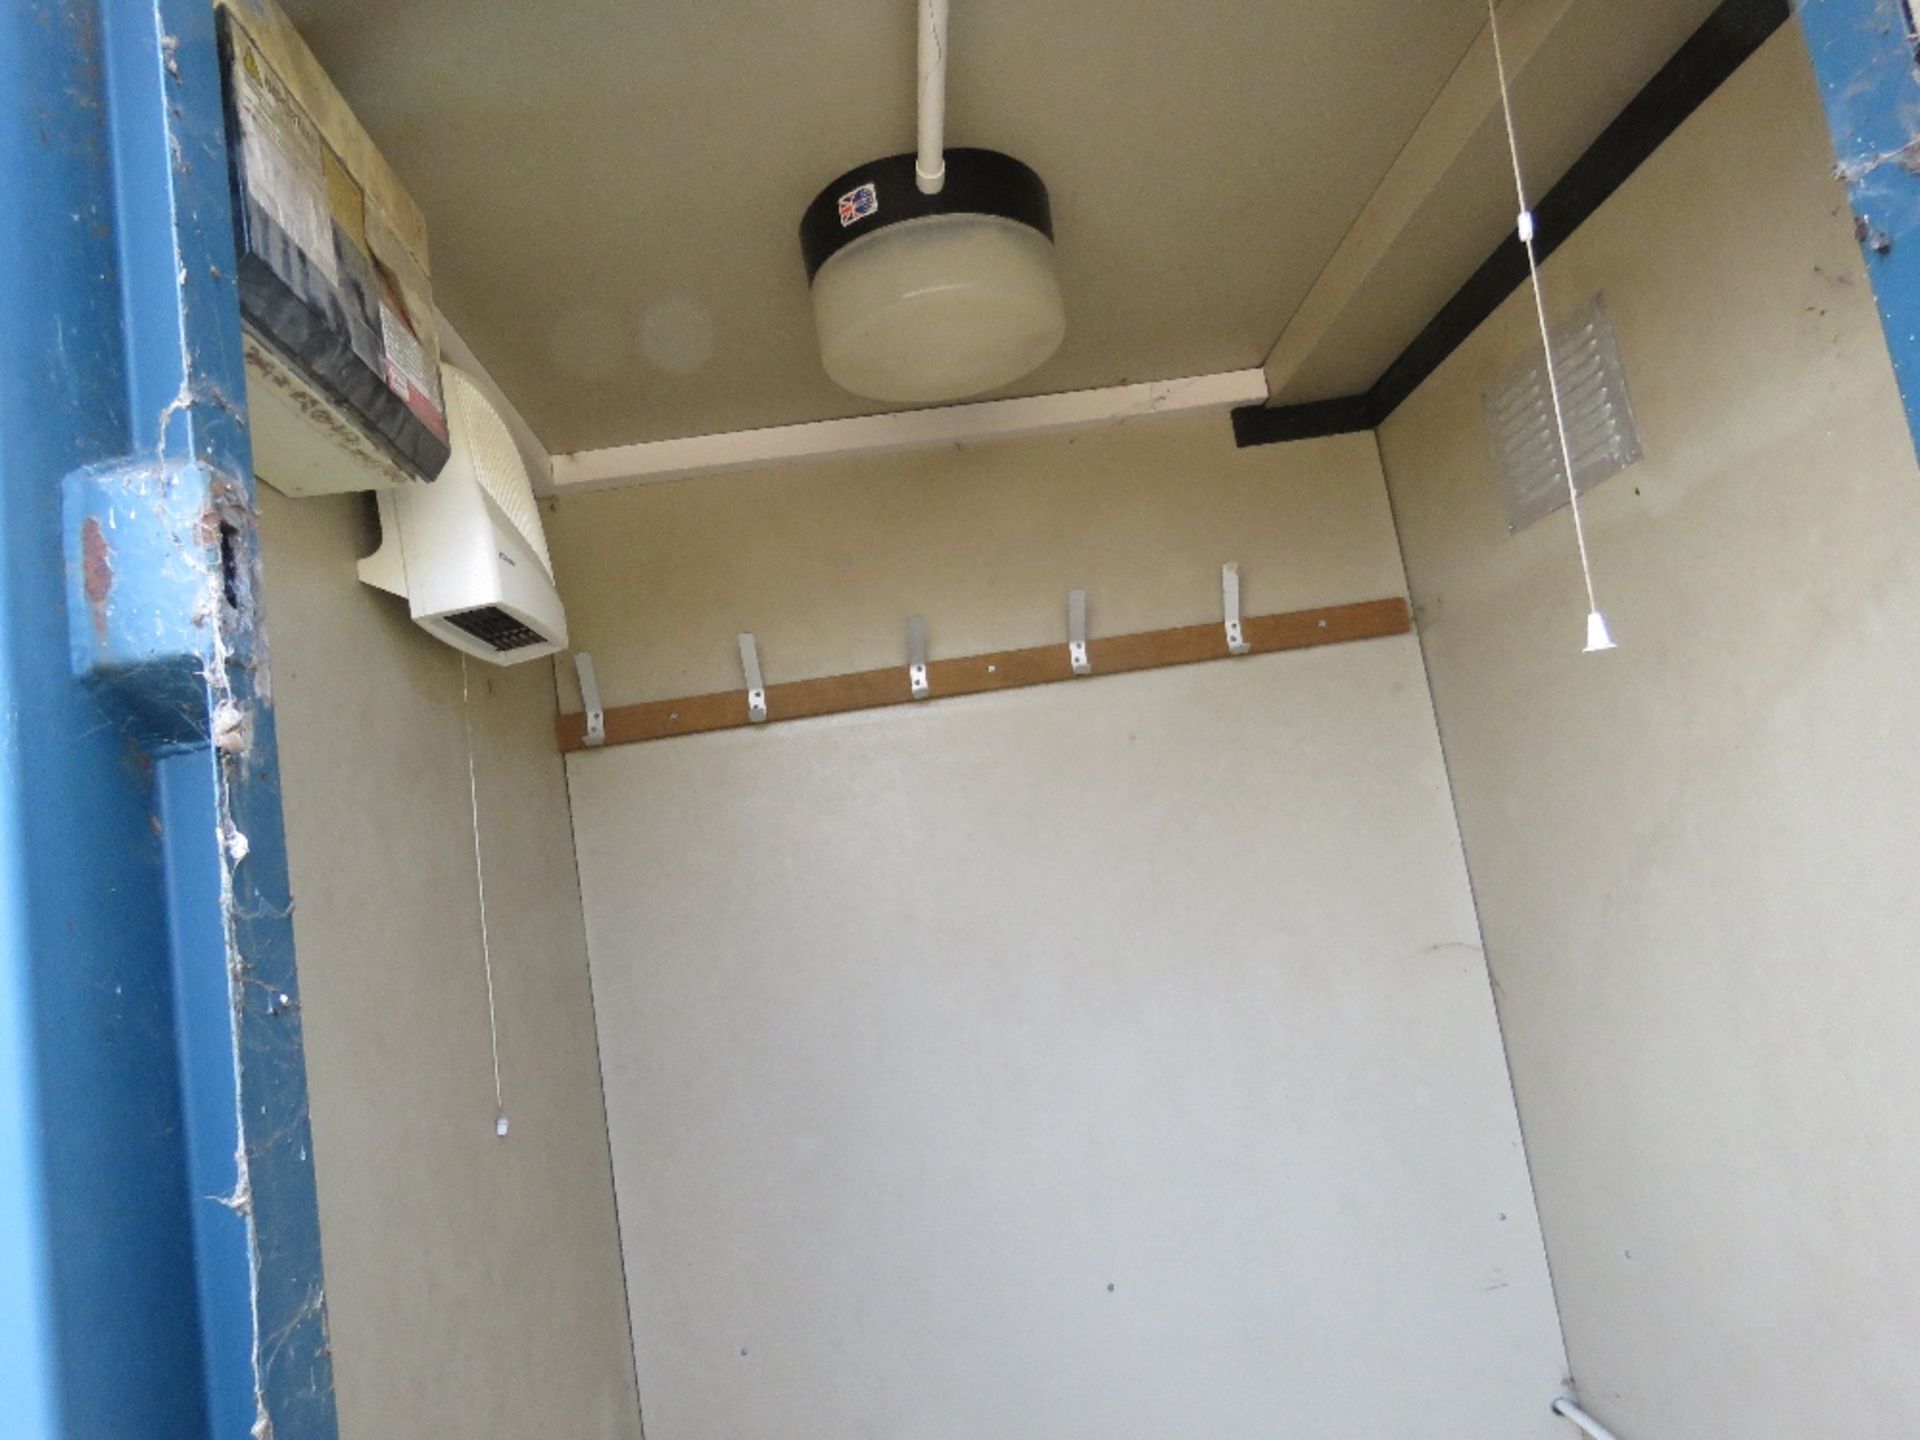 PLUG AND GO STEEL SITE STORE UNIT 9FT X 8FT APPROX. COMPRISING LOCKABLE STORAGE AREAS PLUS A TOILET - Image 9 of 9